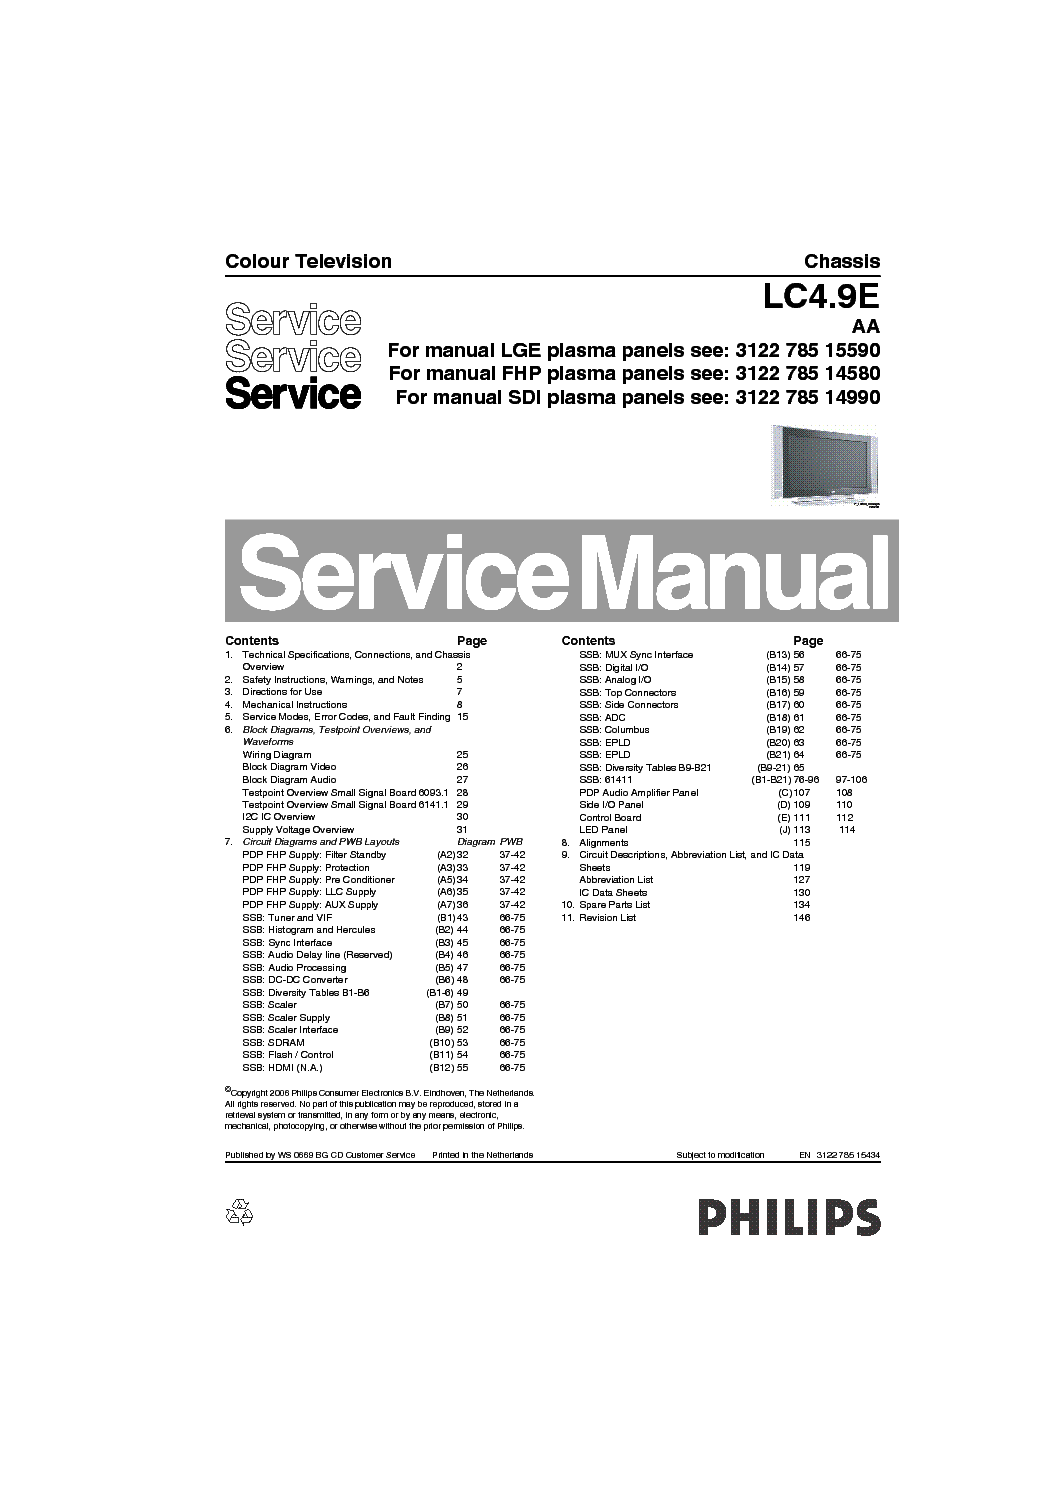 PHILIPS CHASSIS LC4.9E-AA service manual (1st page)